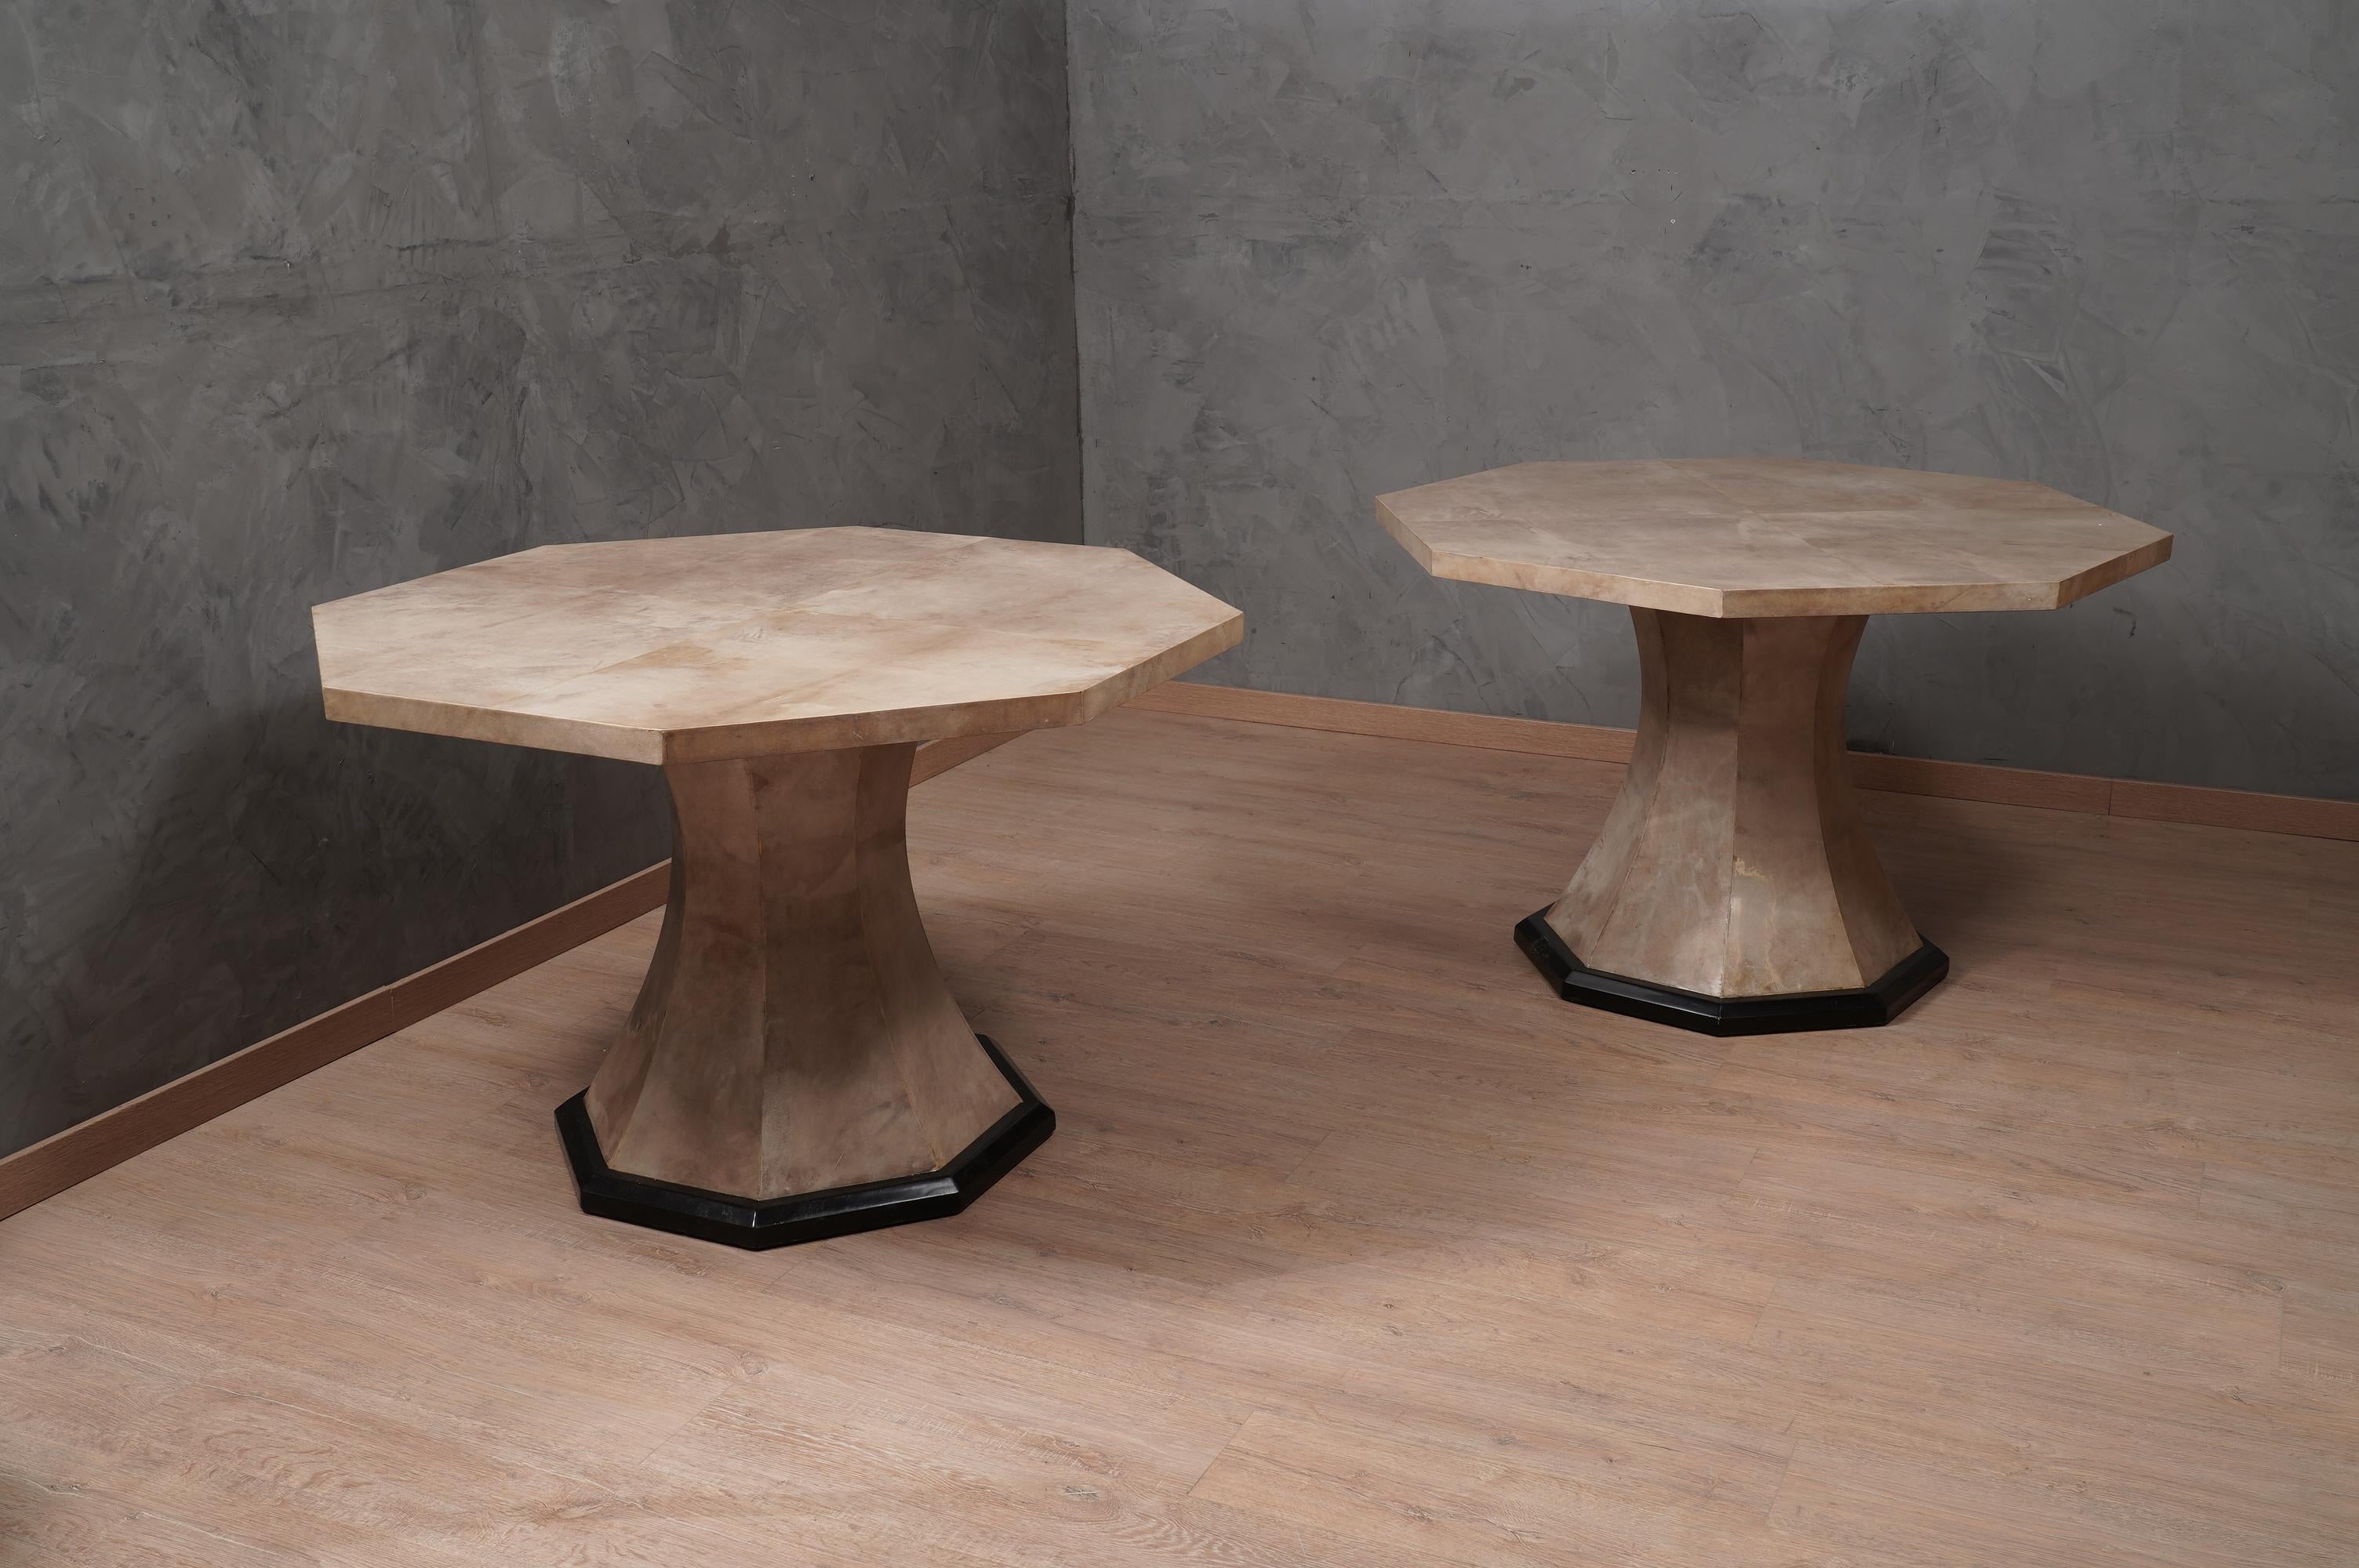 Elegant and original octagonal table in parchment leather, linear, distinct and well finished, the table from the end of the last century has a very strong character but at the same time its design makes it very light.

The table has an octagonal